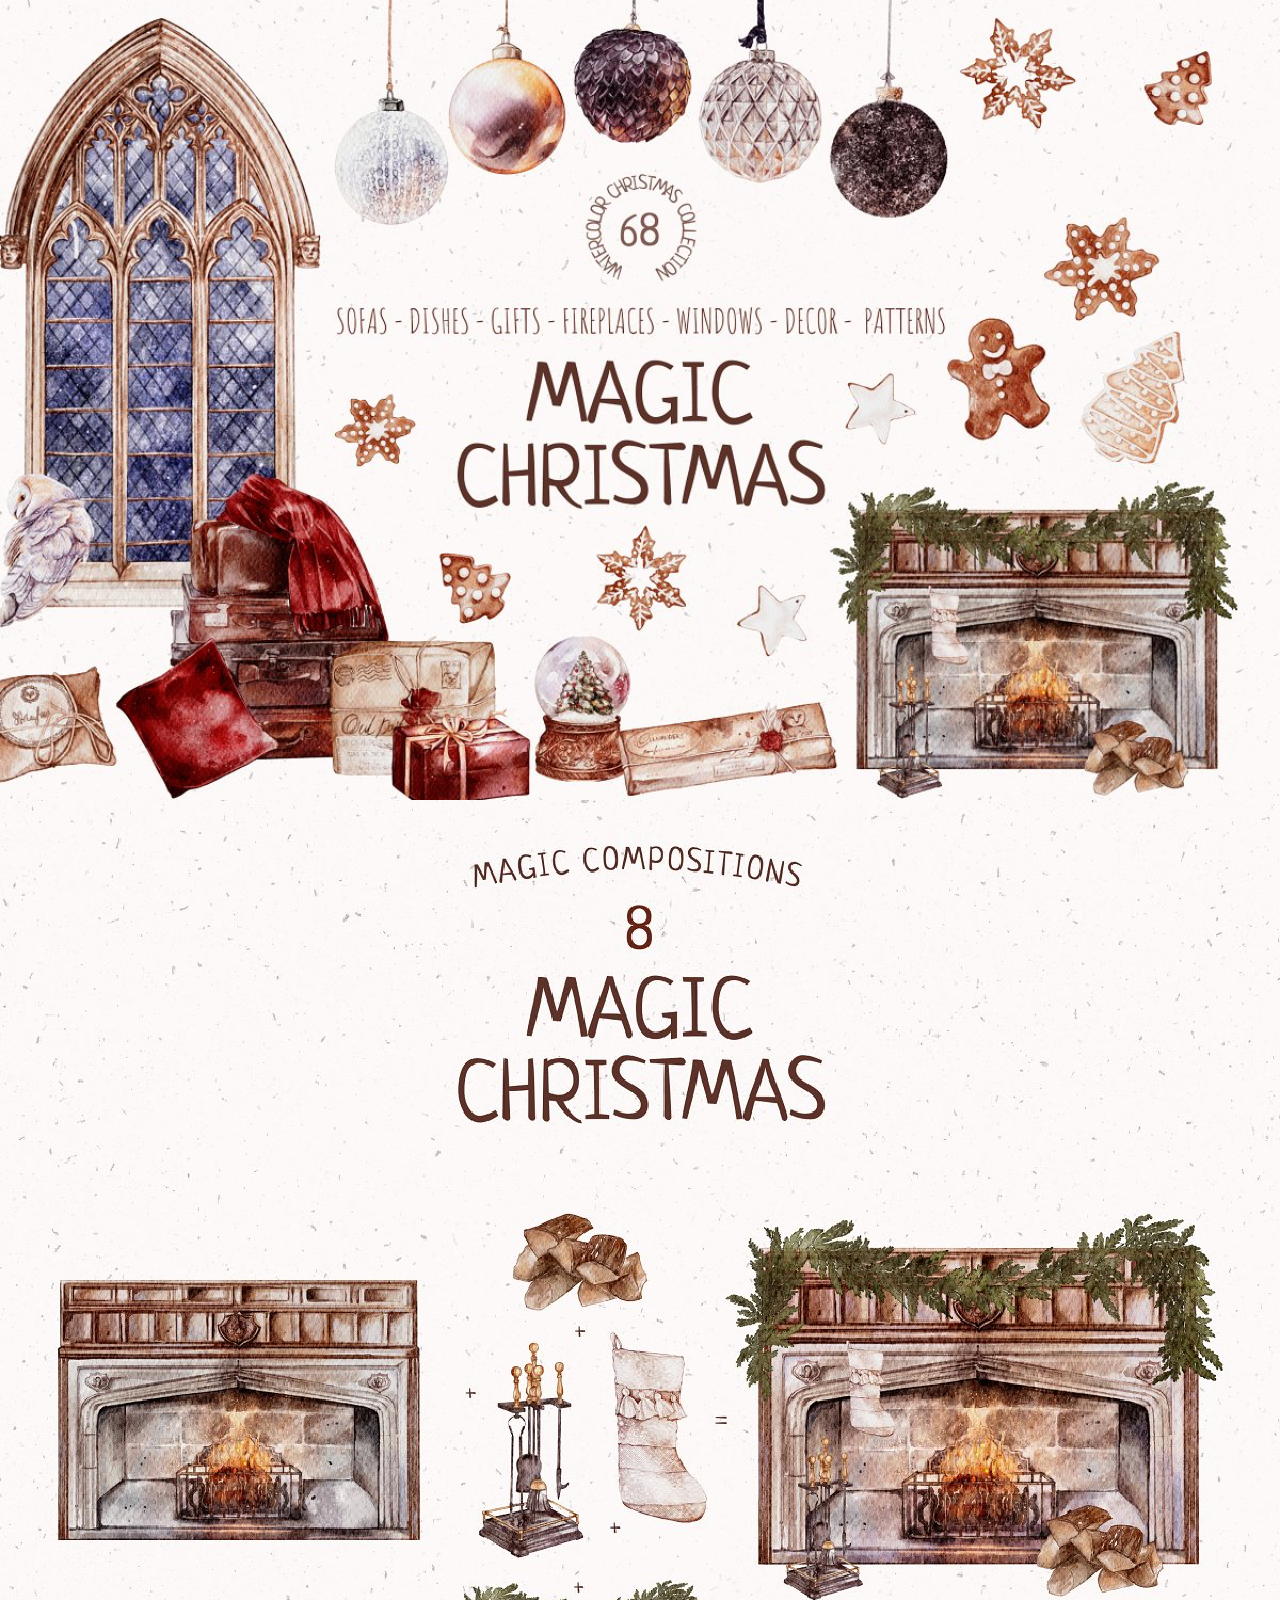 Magic christmas collection pinterest image preview.